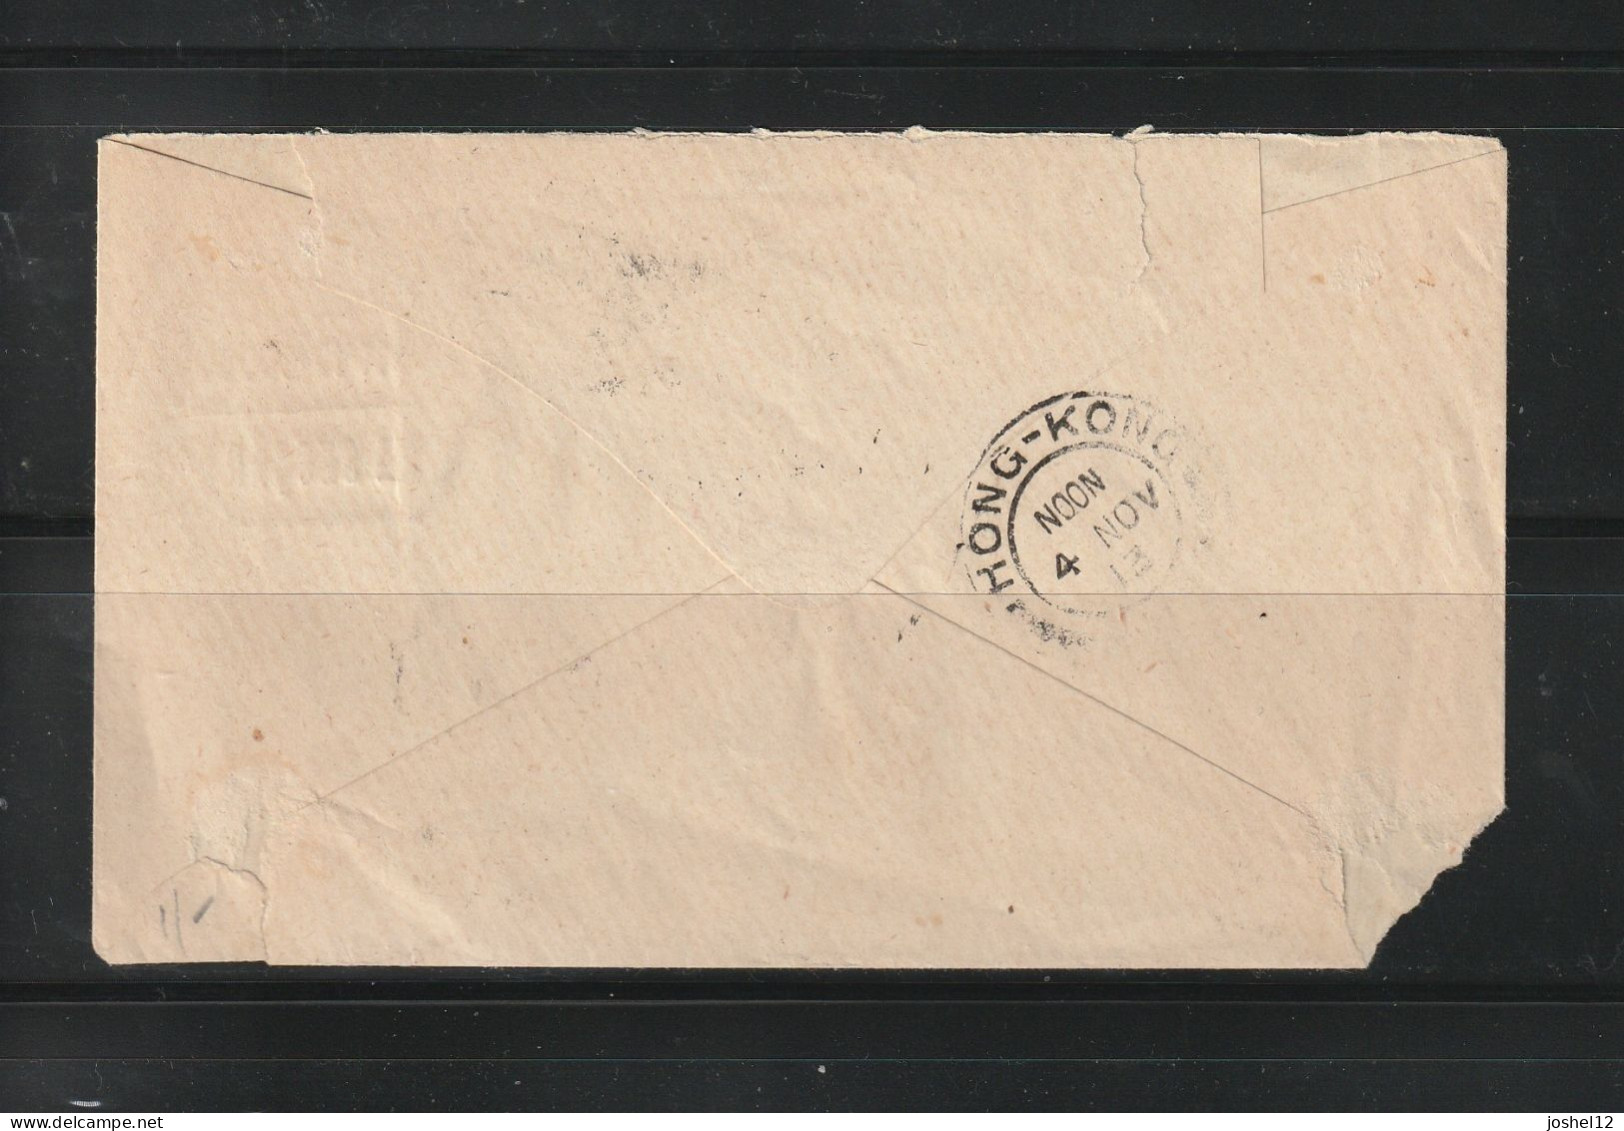 Macau Macao Carlos 20r & Overprint And Surcharge + Cover. MH/Used & No Gum. Fine - Ongebruikt